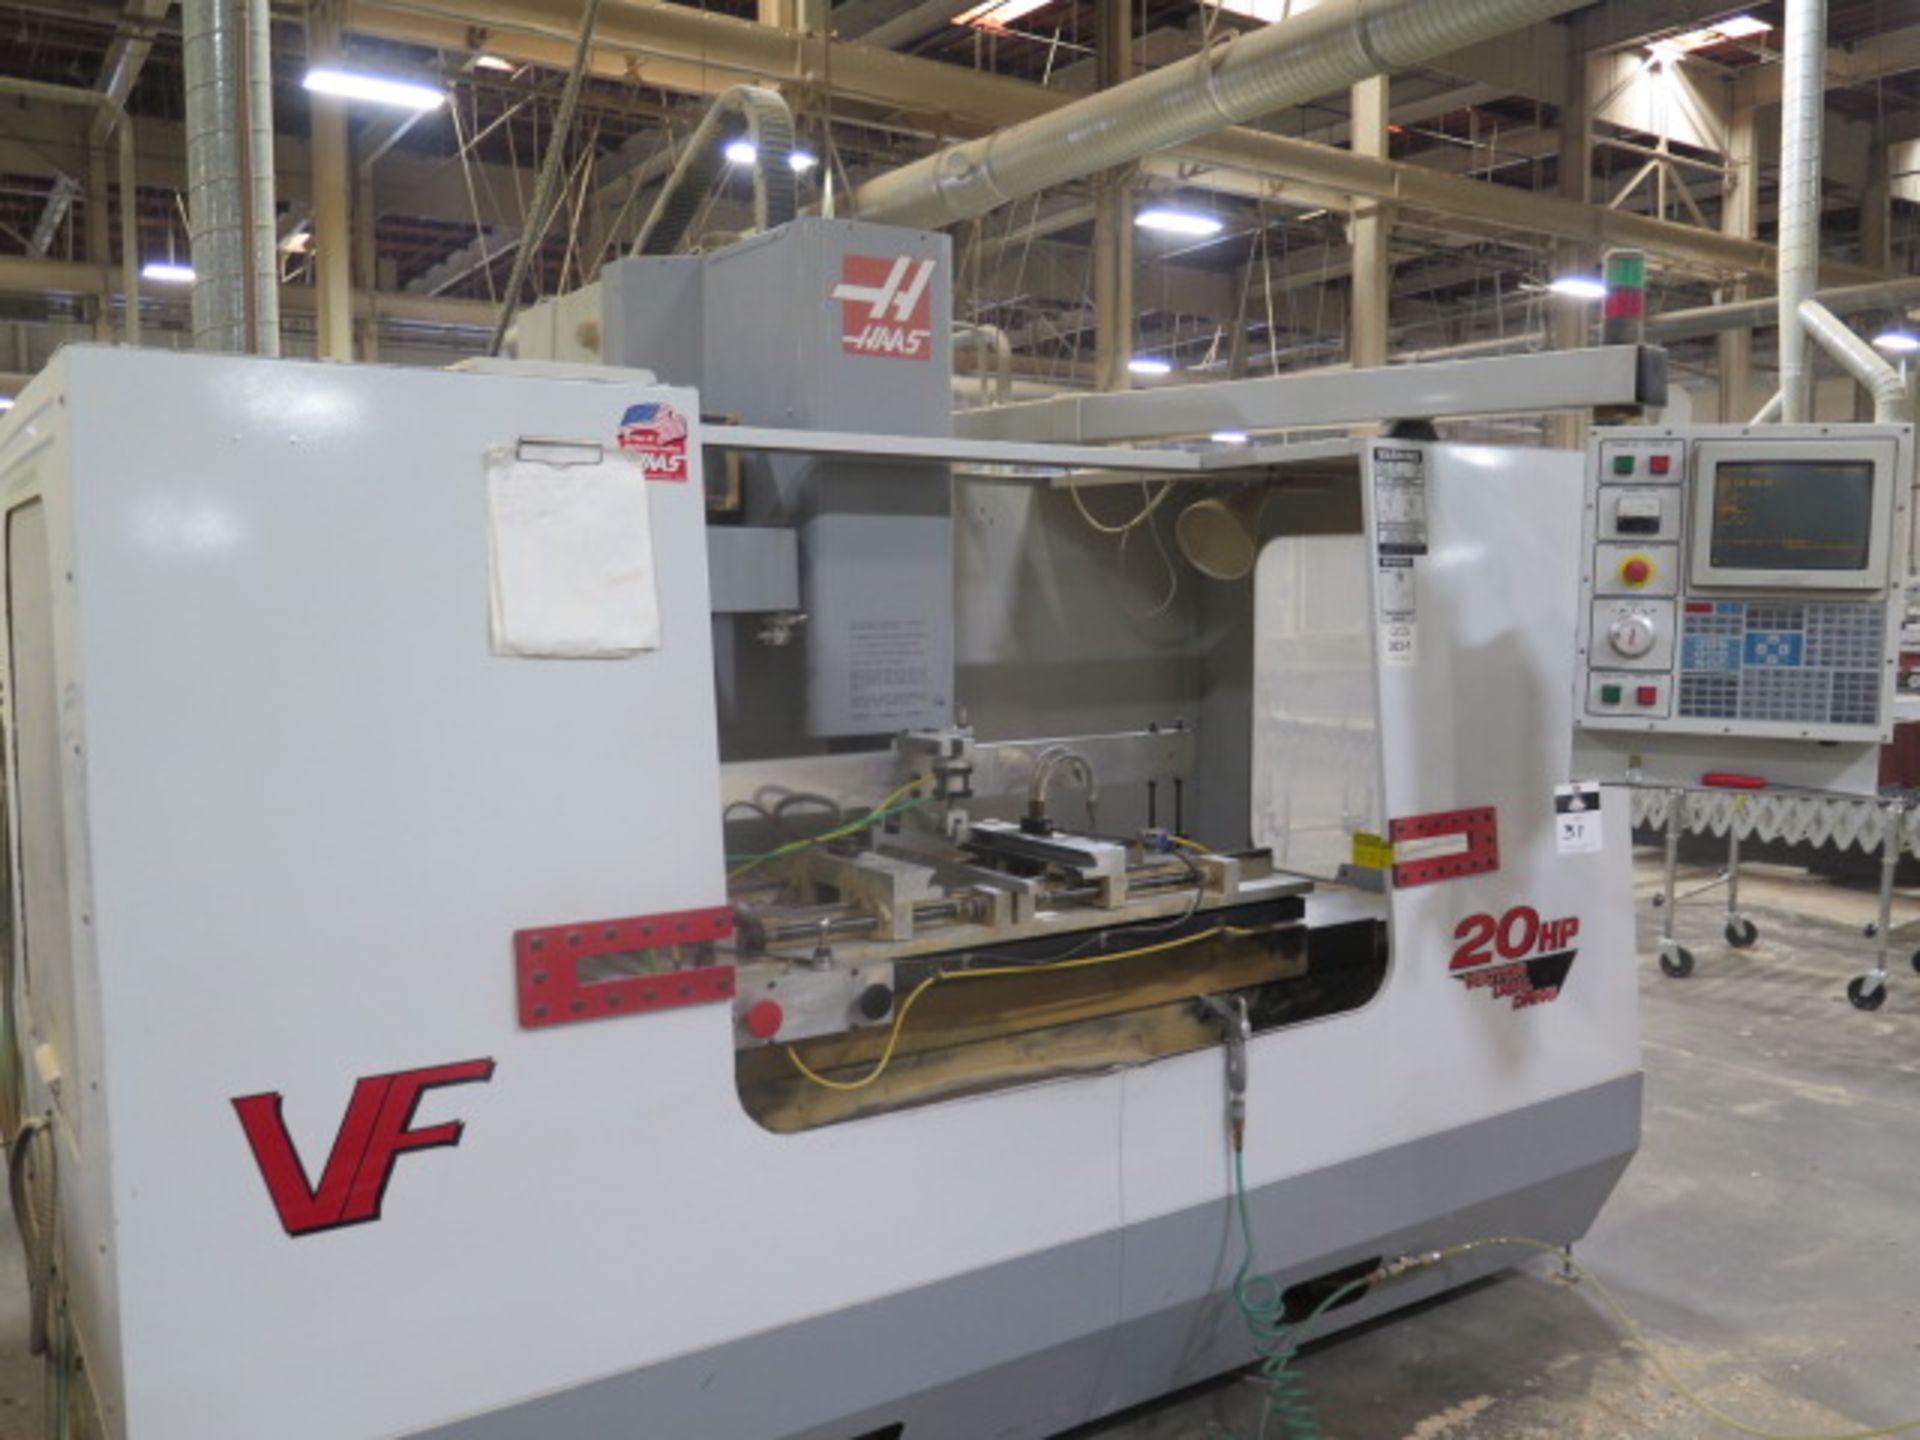 2000 Haas VF-3 CNC VMC s/n 19712 w/ Haas Controls, 20-Station ATC, CAT-40,NO COOLER TANK, SOLD AS IS - Bild 3 aus 17